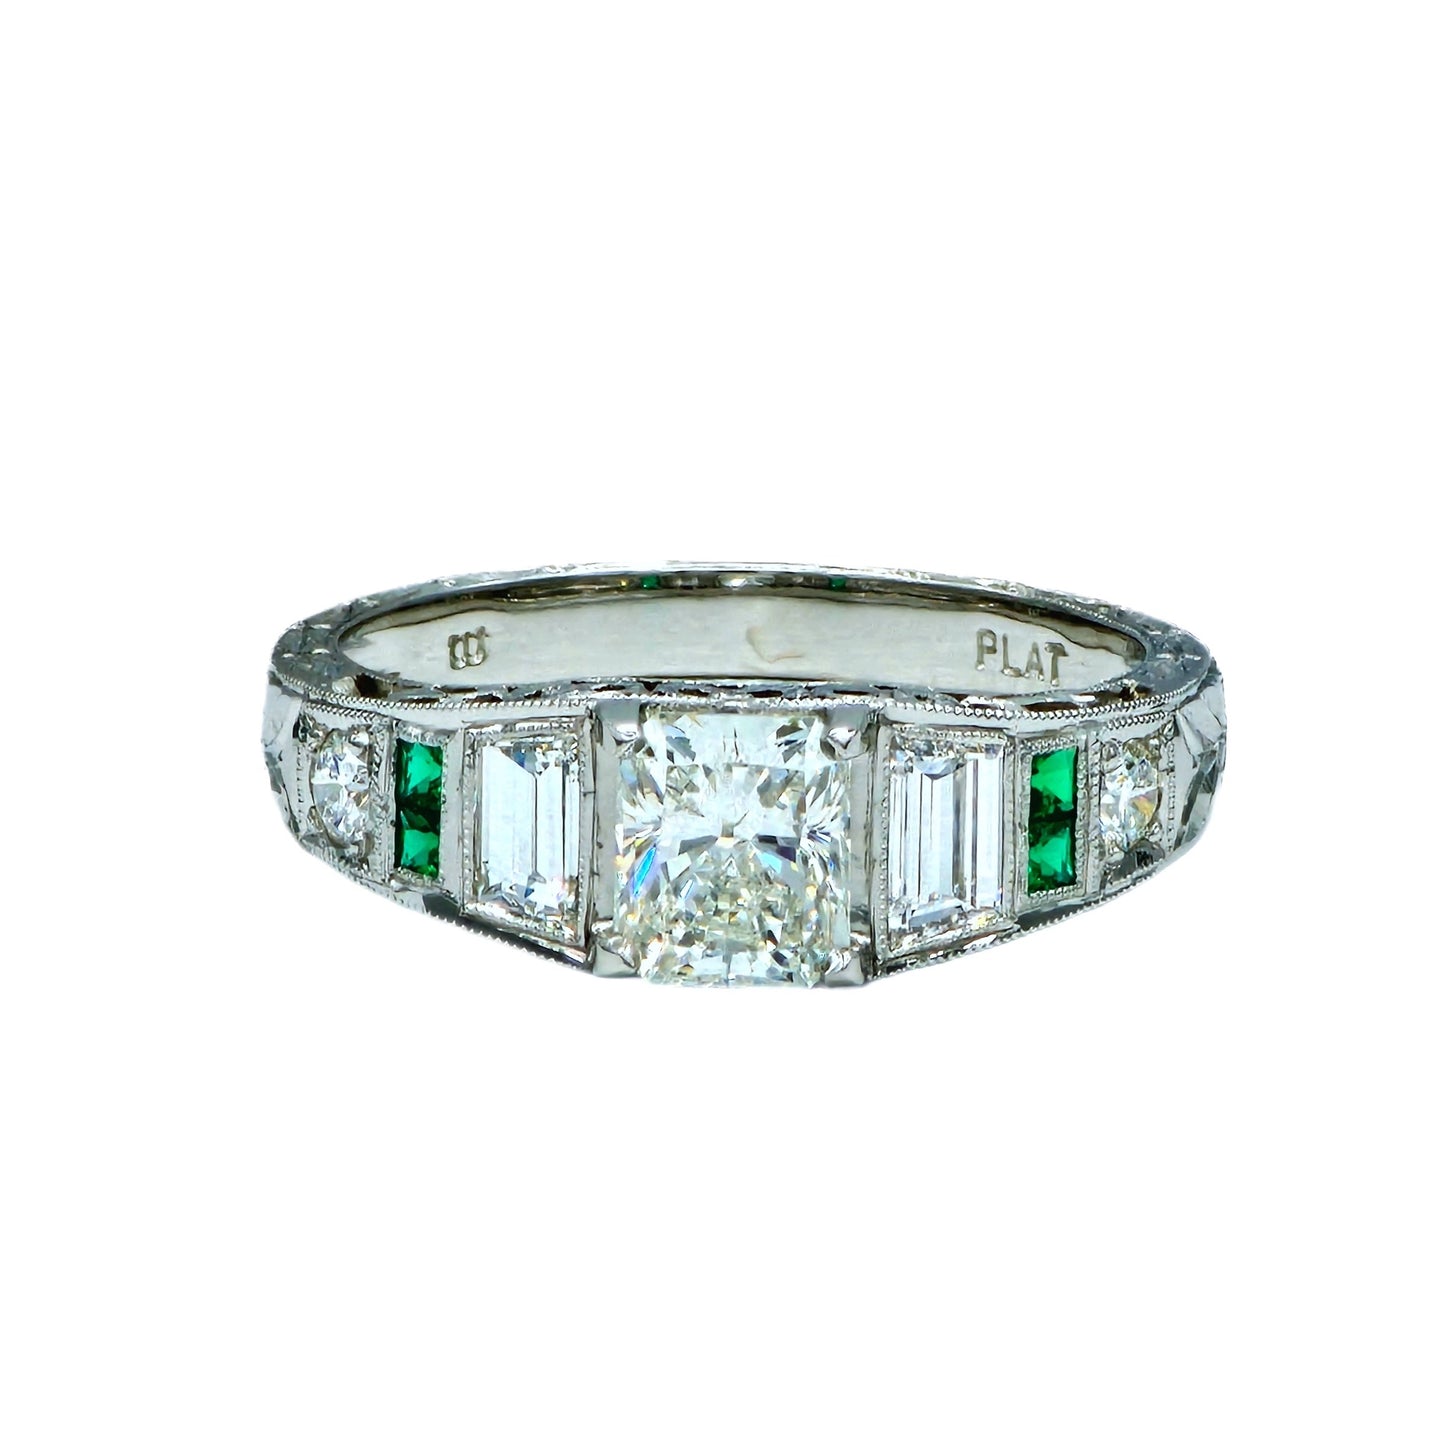 1.02 Carat Radiant Cut Diamond RIng by Whitehouse Brothers